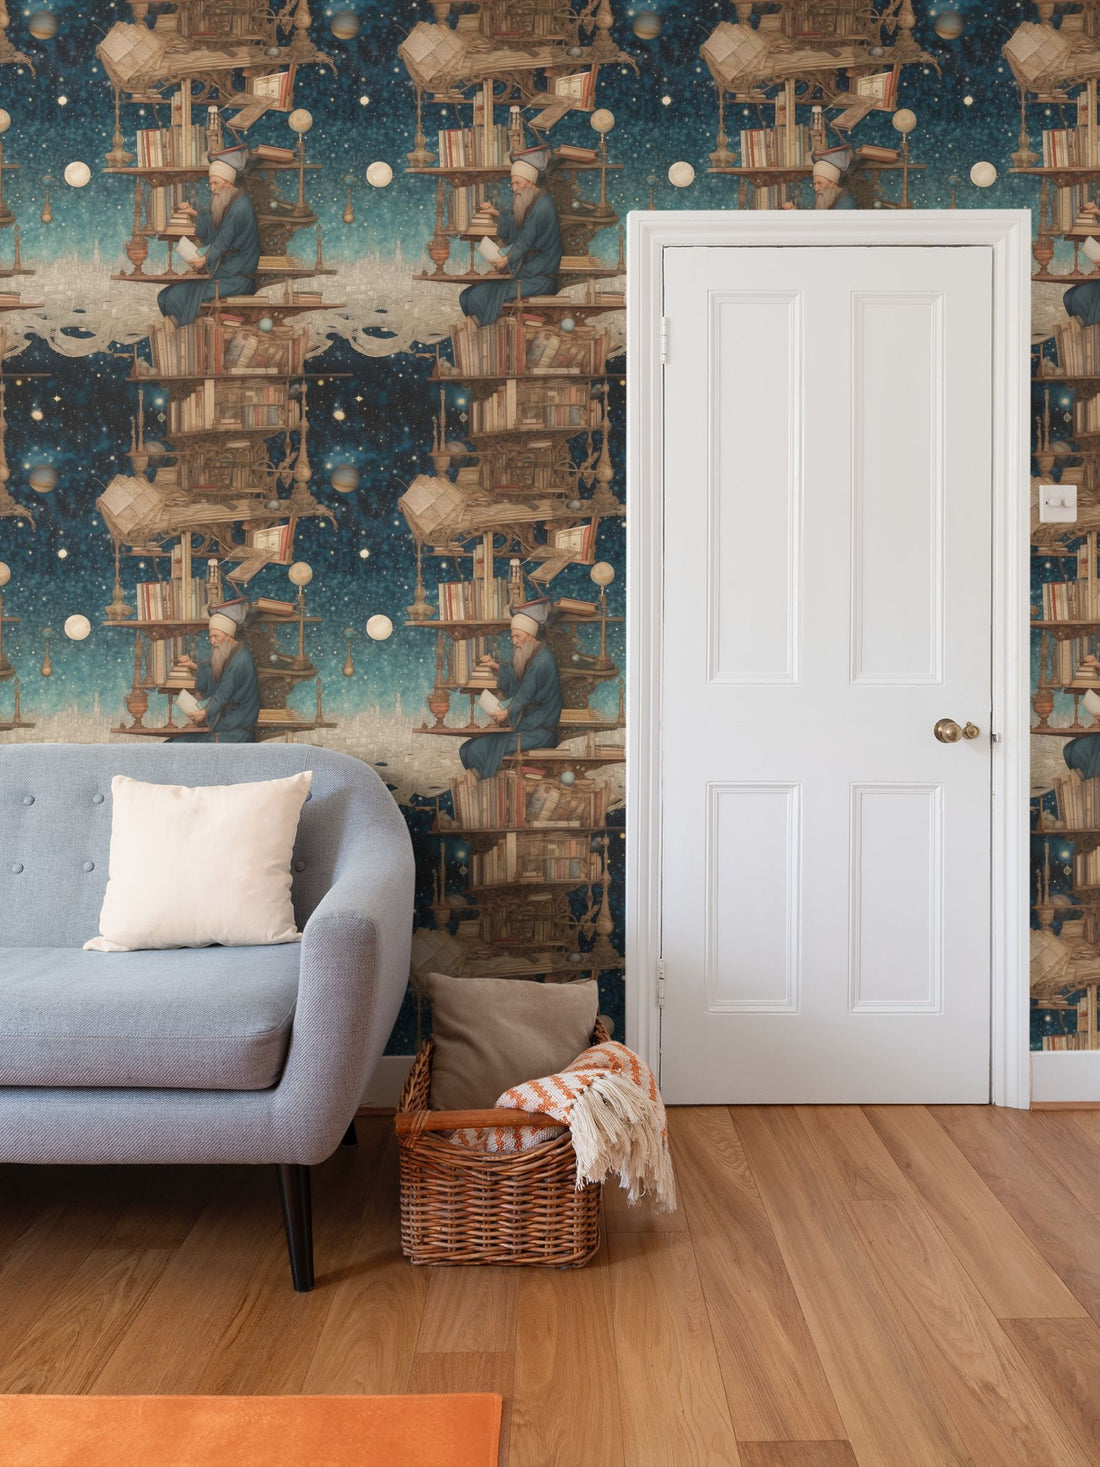 The Ultimate Guide to Hanging Wallpaper - Tips and Tricks for All